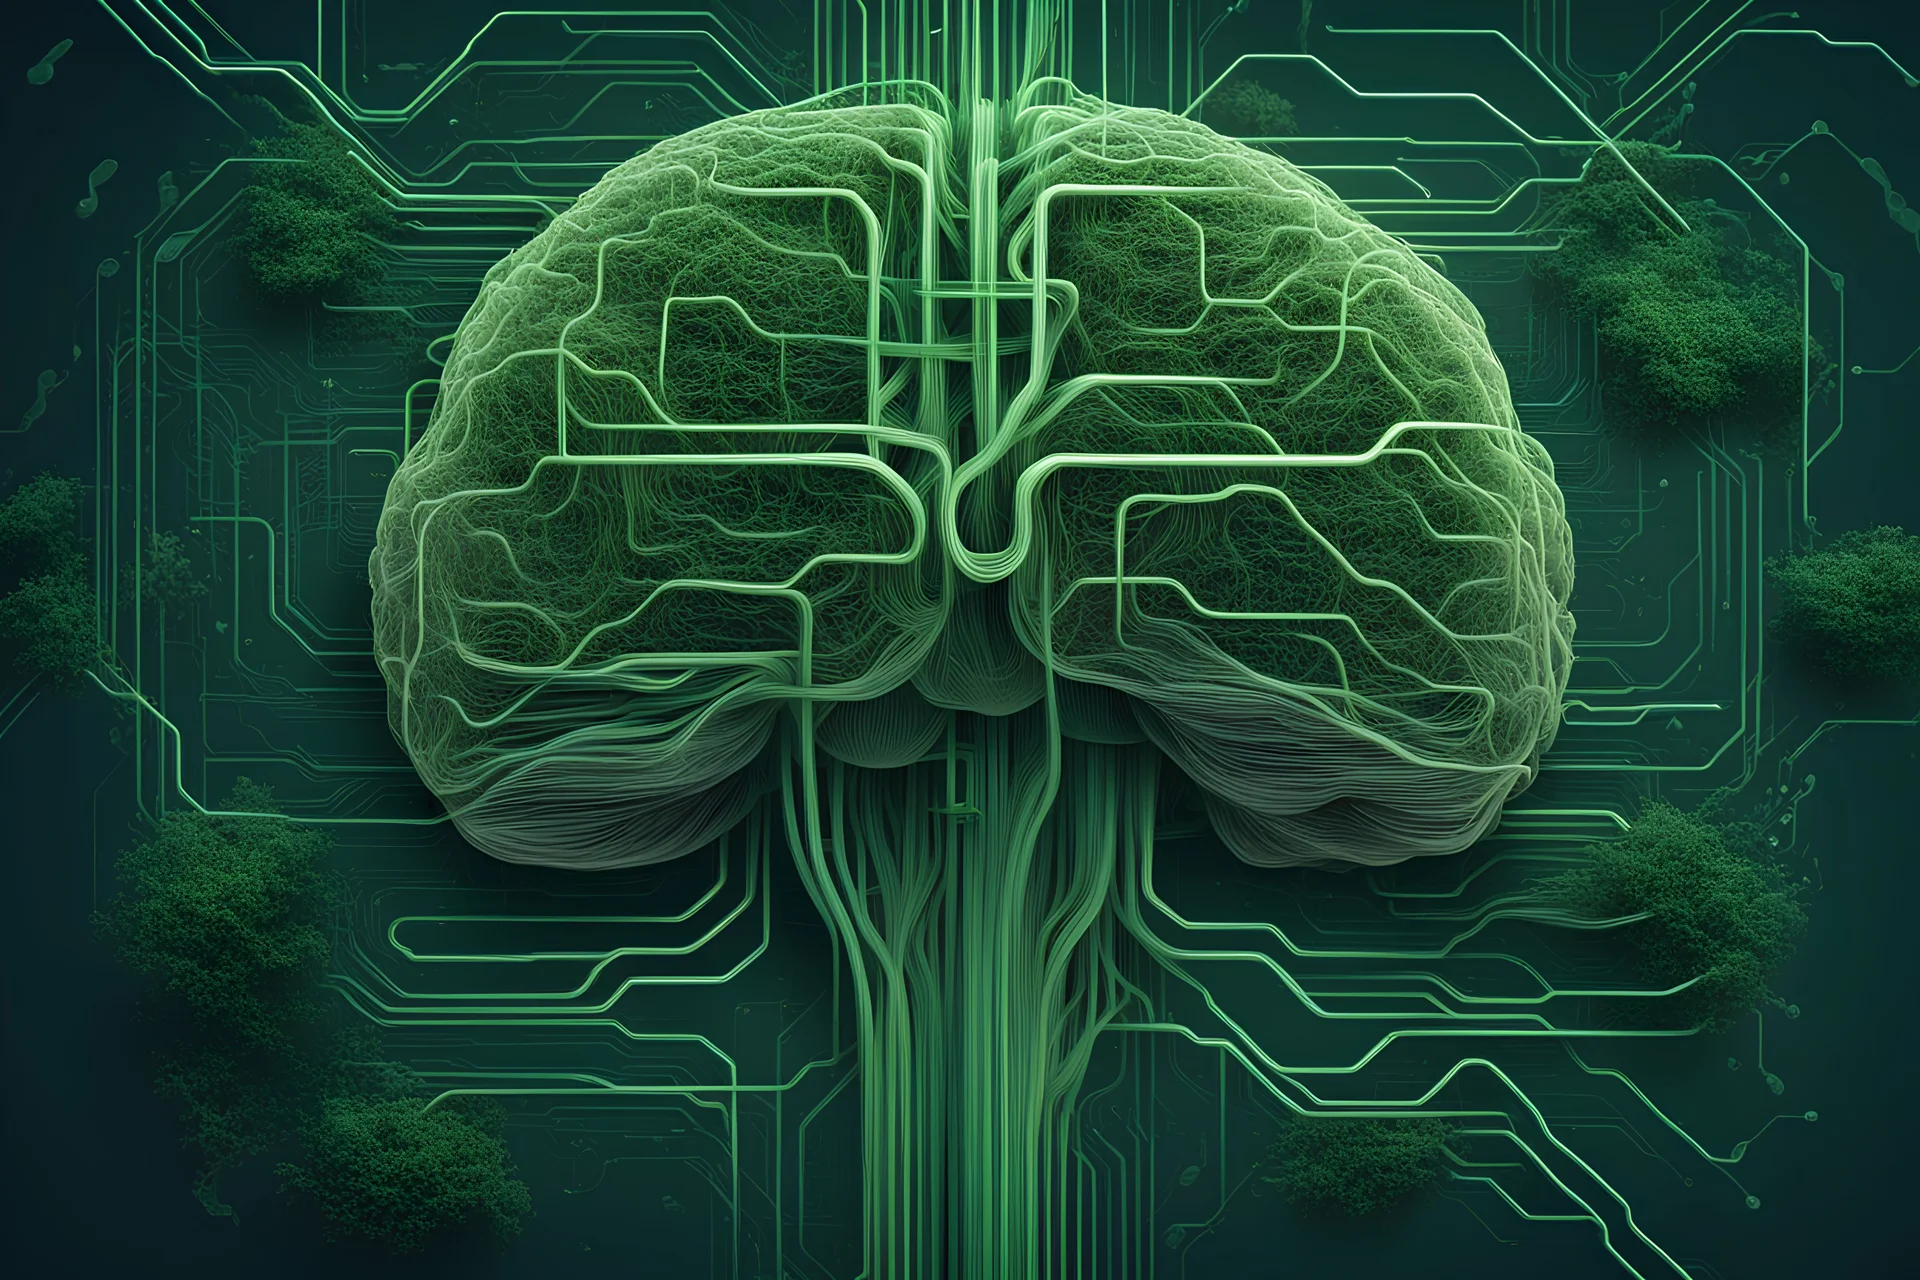 circuitry intertwined with green foliage, brain-shaped nodes interconnected with geometric lines, generating AI insights